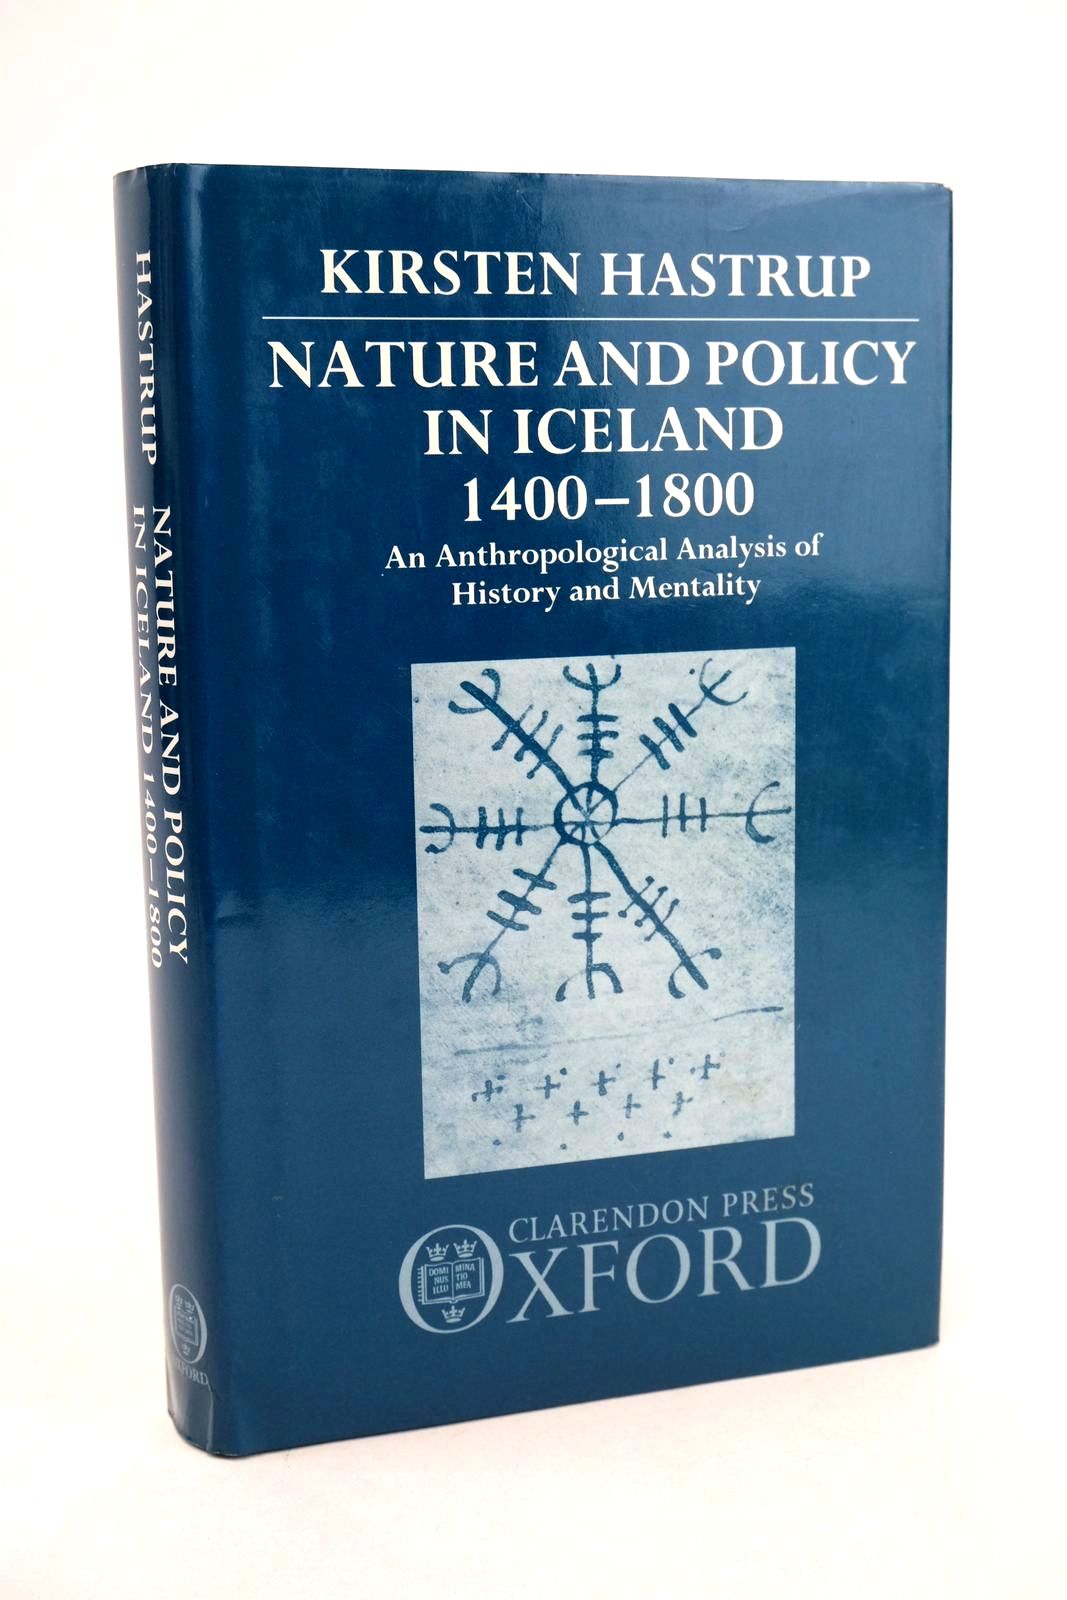 Photo of NATURE AND POLICY IN ICELAND 1400-1800 written by Hastrup, K. published by Oxford University Press, Clarendon Press (STOCK CODE: 1327359)  for sale by Stella & Rose's Books